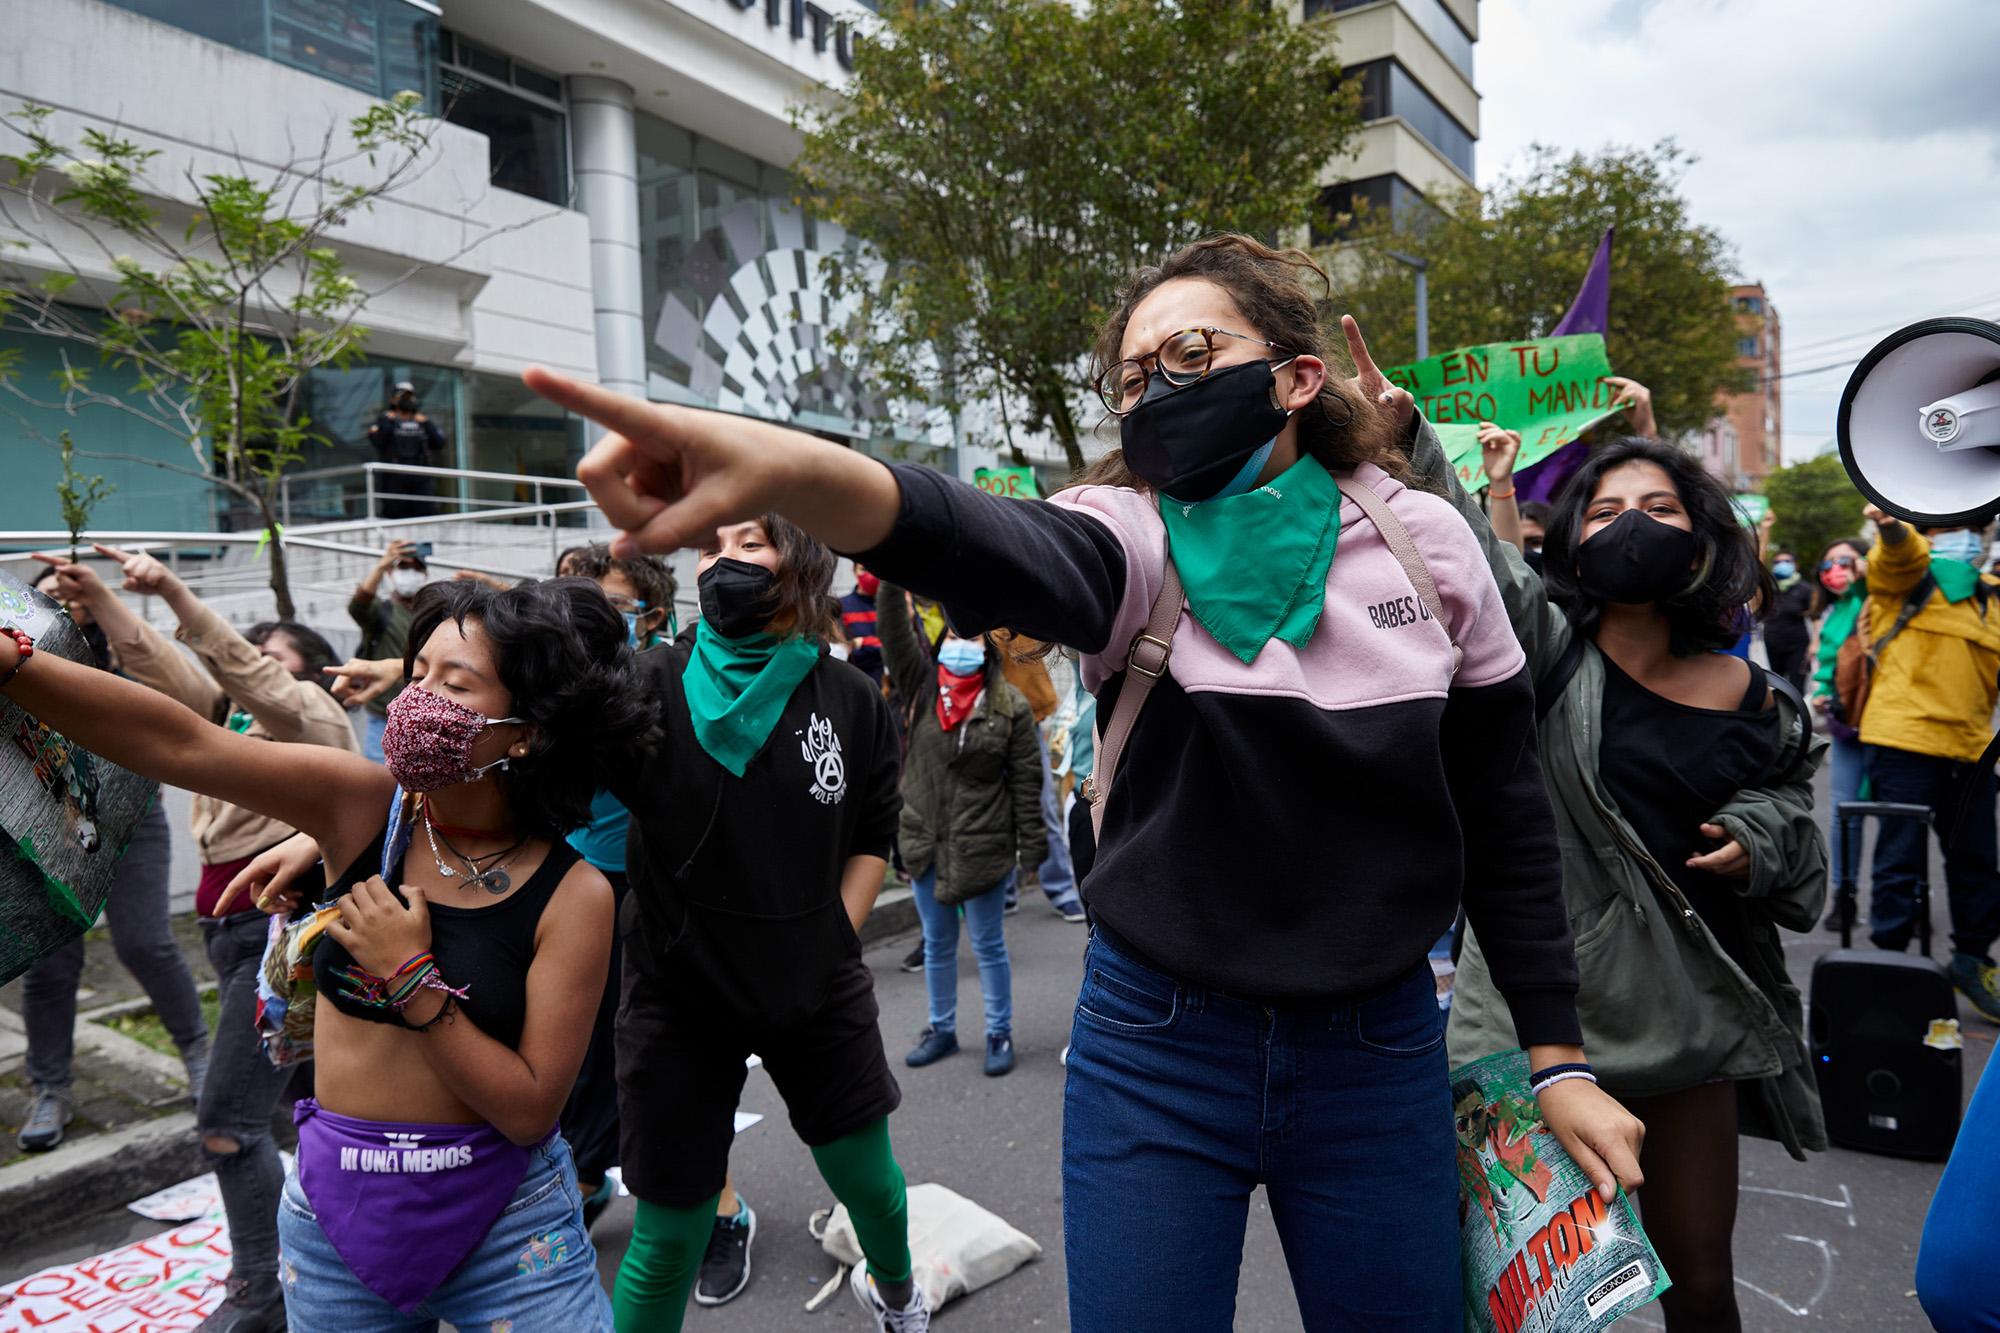 The performance &quot;Un violador en tu camino&quot; (A rapist in your way) is replicated by different women waiting for the ruling of the Constitutional Court. &quot;...And it wasn&#39;t my fault, or where I was, or how I was dressed,&quot; chant young women. &nbsp;April 28, 2021, Quito, Ecuador.